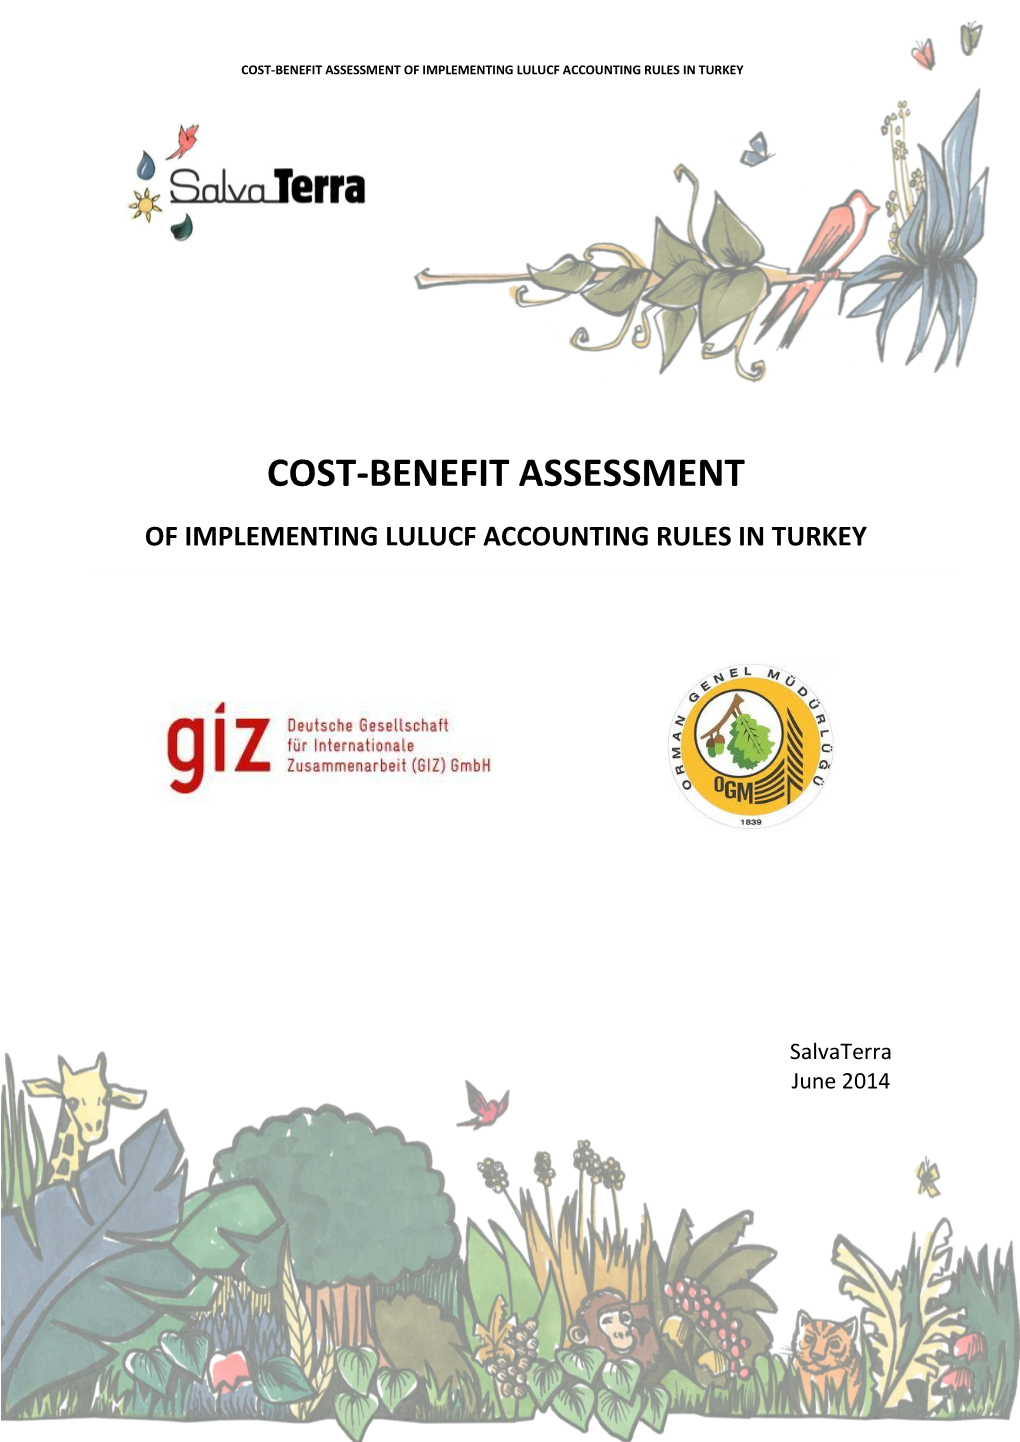 Cost-Benefit Assessment of Implementing Lulucf Accounting Rules in Turkey